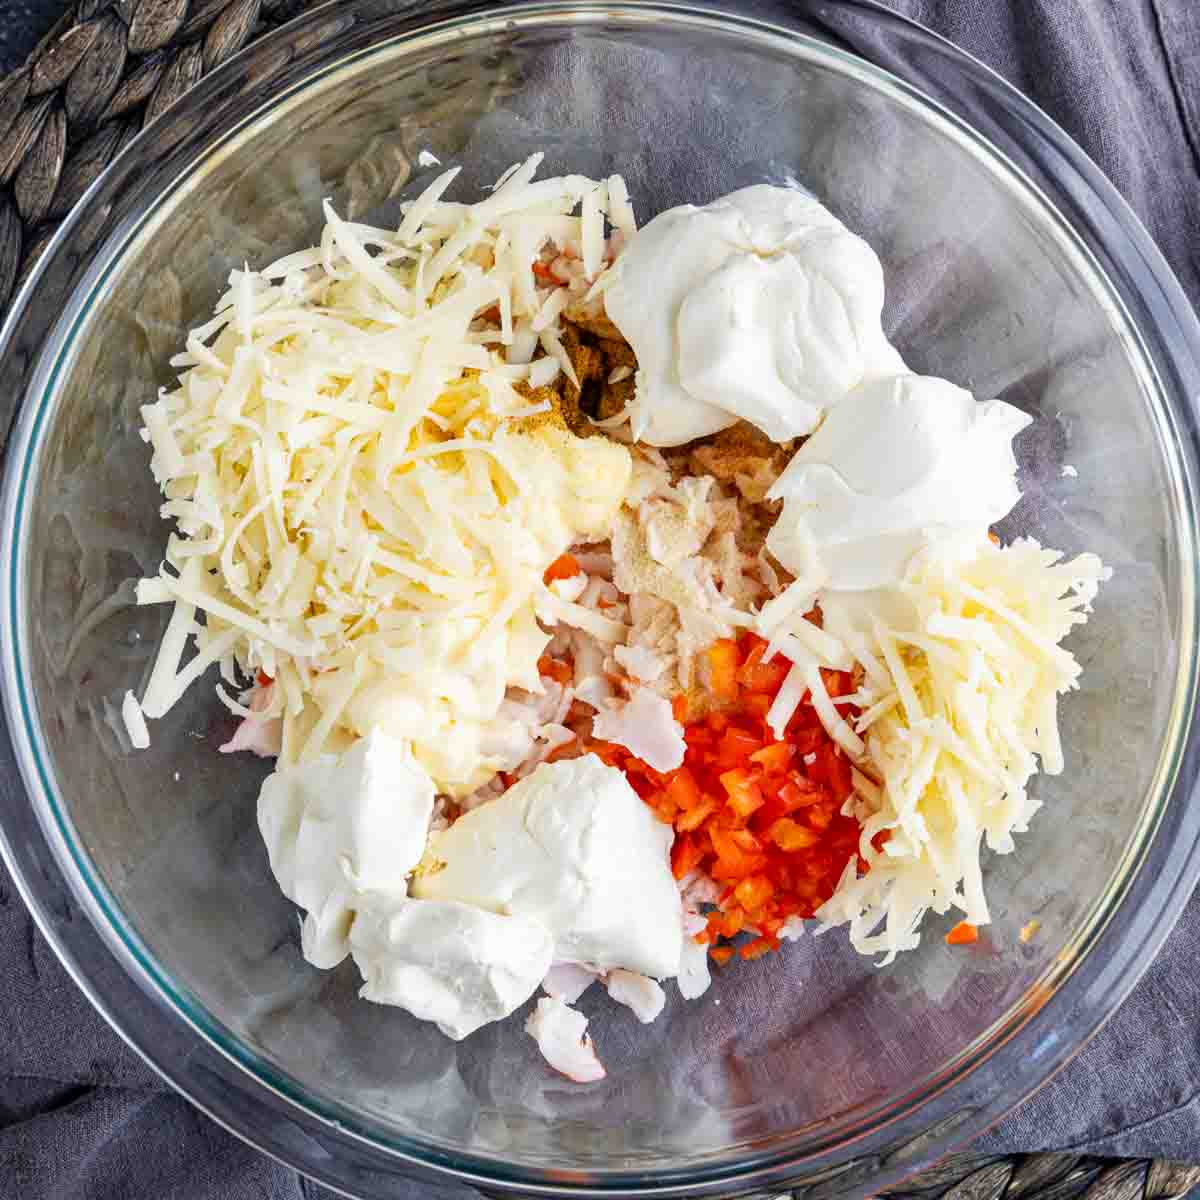 A glass bowl filled with cheese, peppers, and other ingredients.